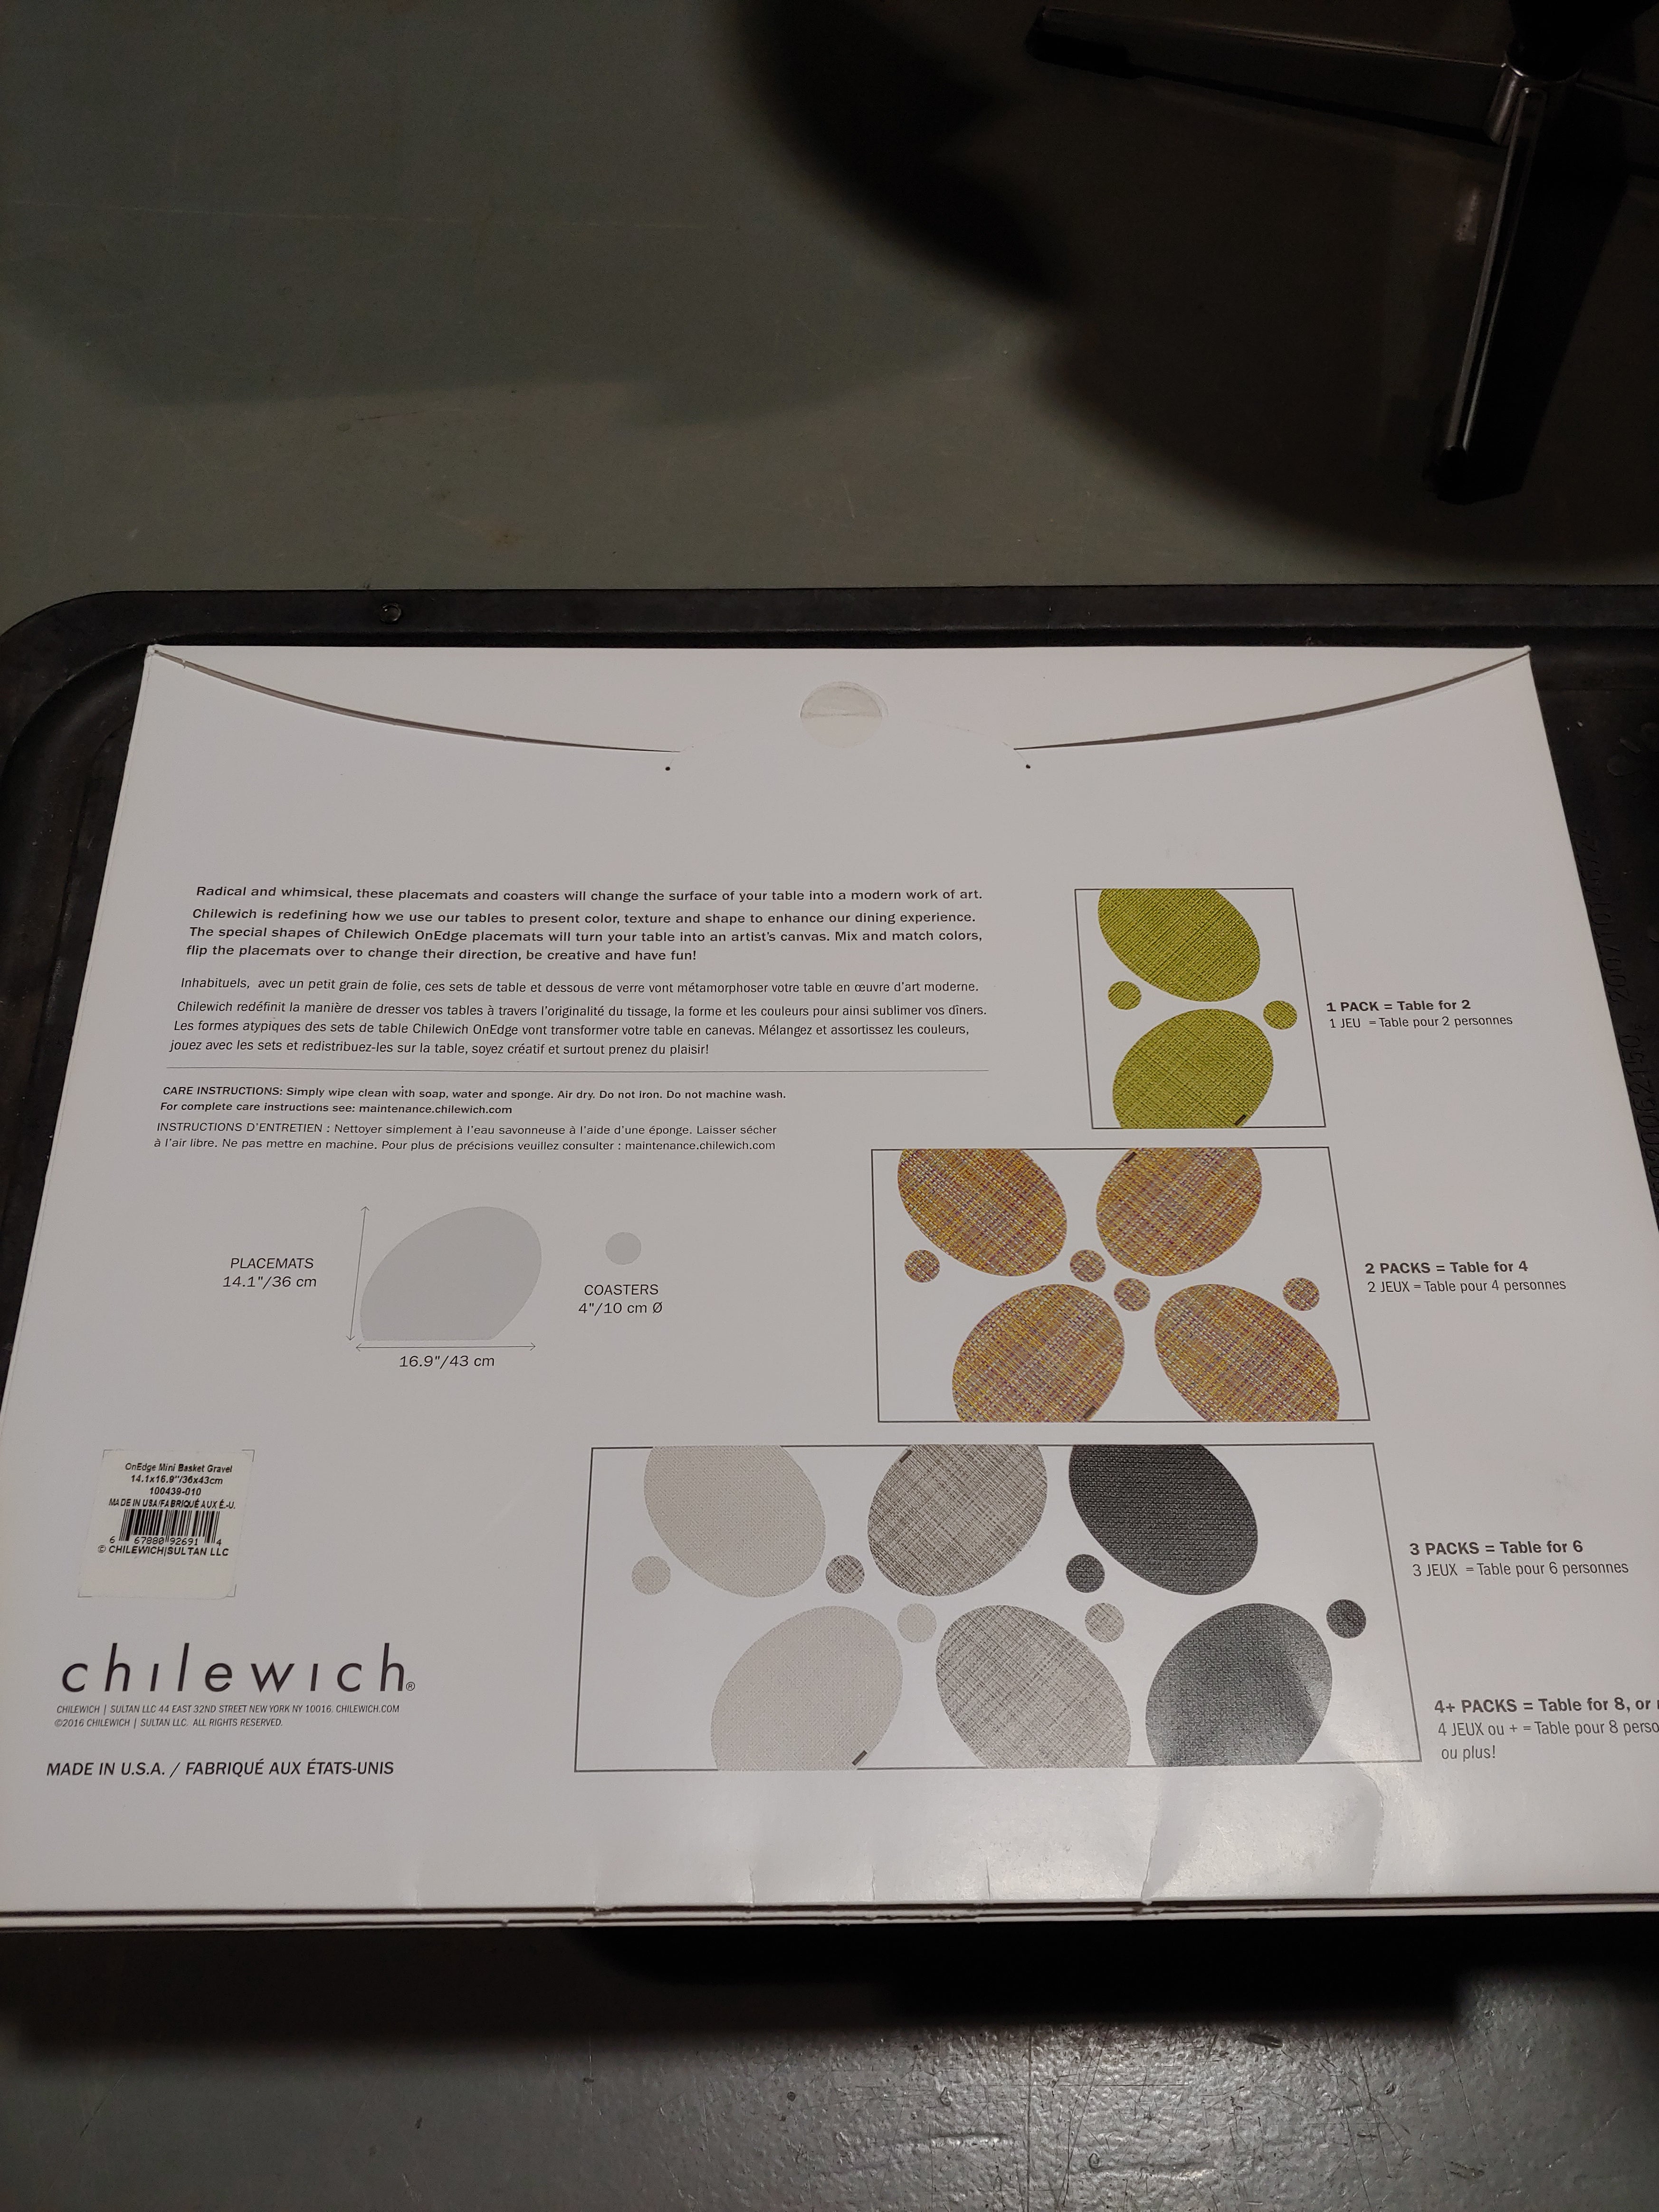 * SALE Chilewich Placemat Oval set OnEdge